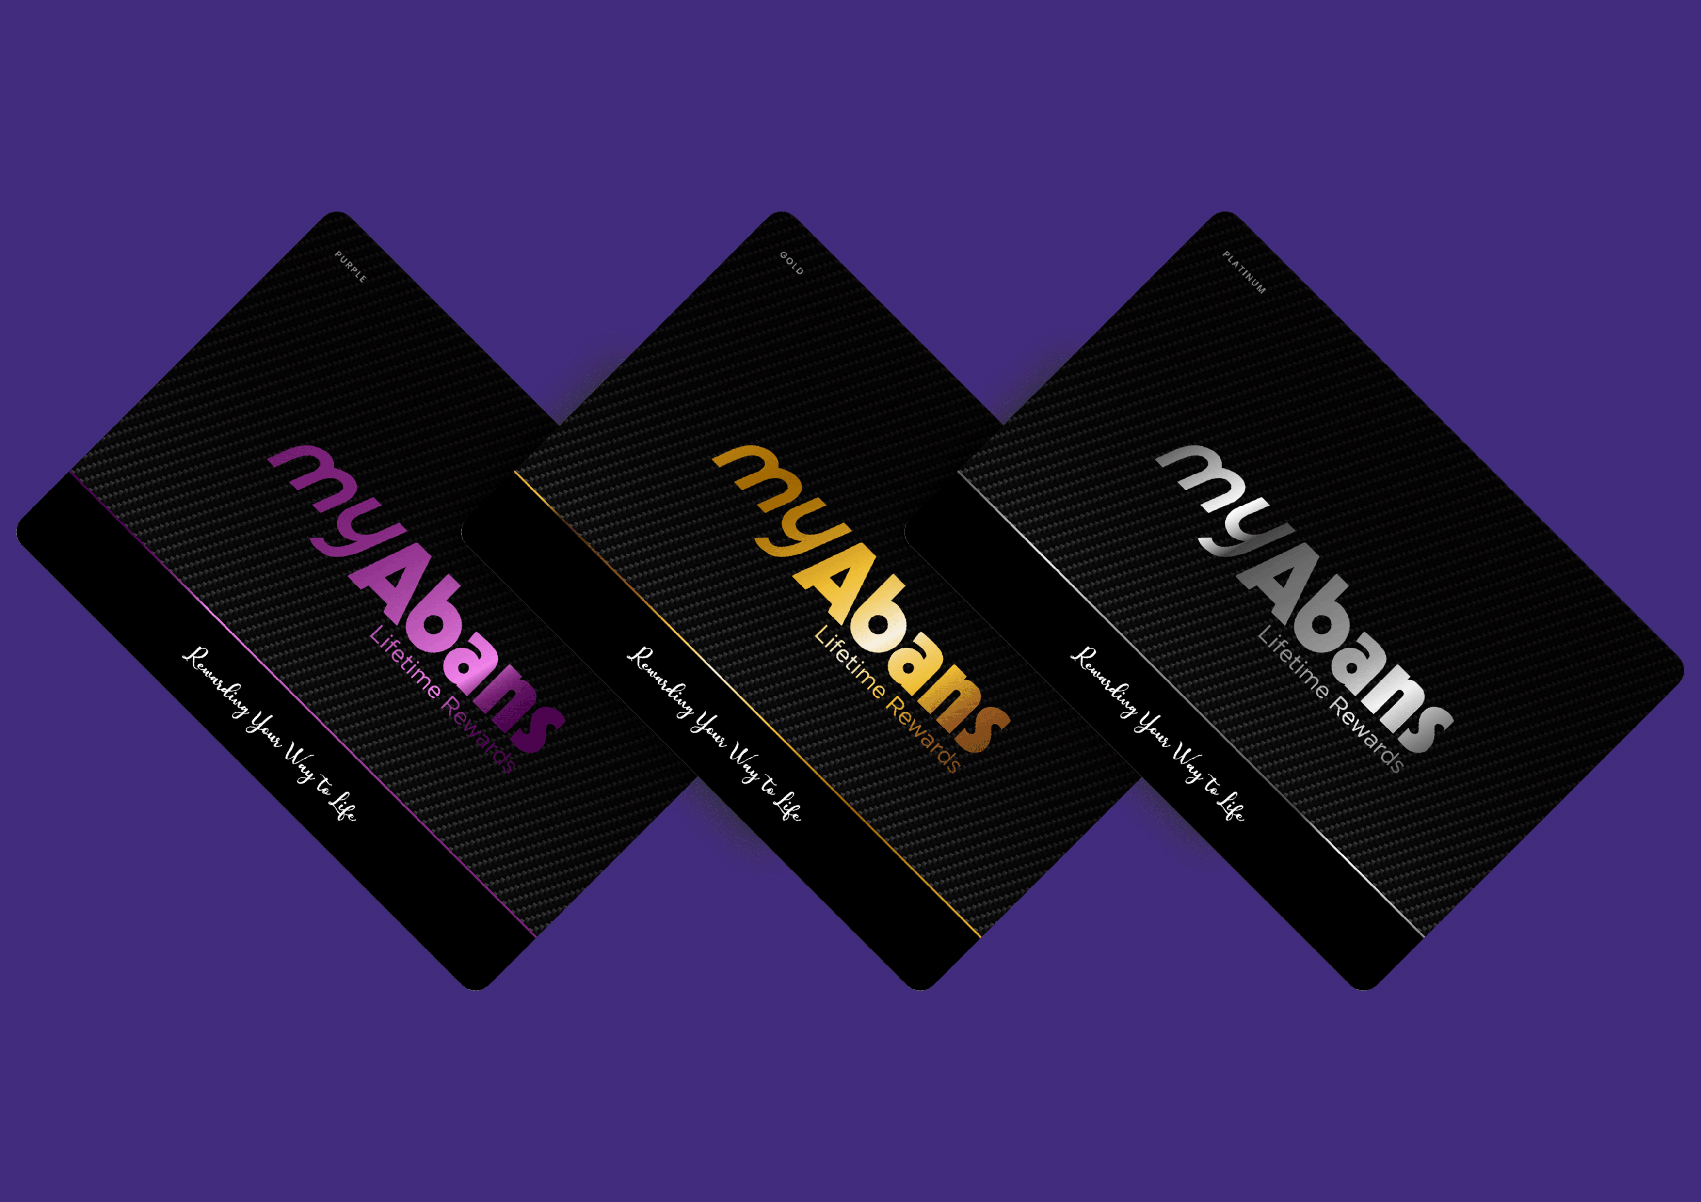 New and Improved MyAbans Loyalty Program with Enhanced Benefits for Customers.